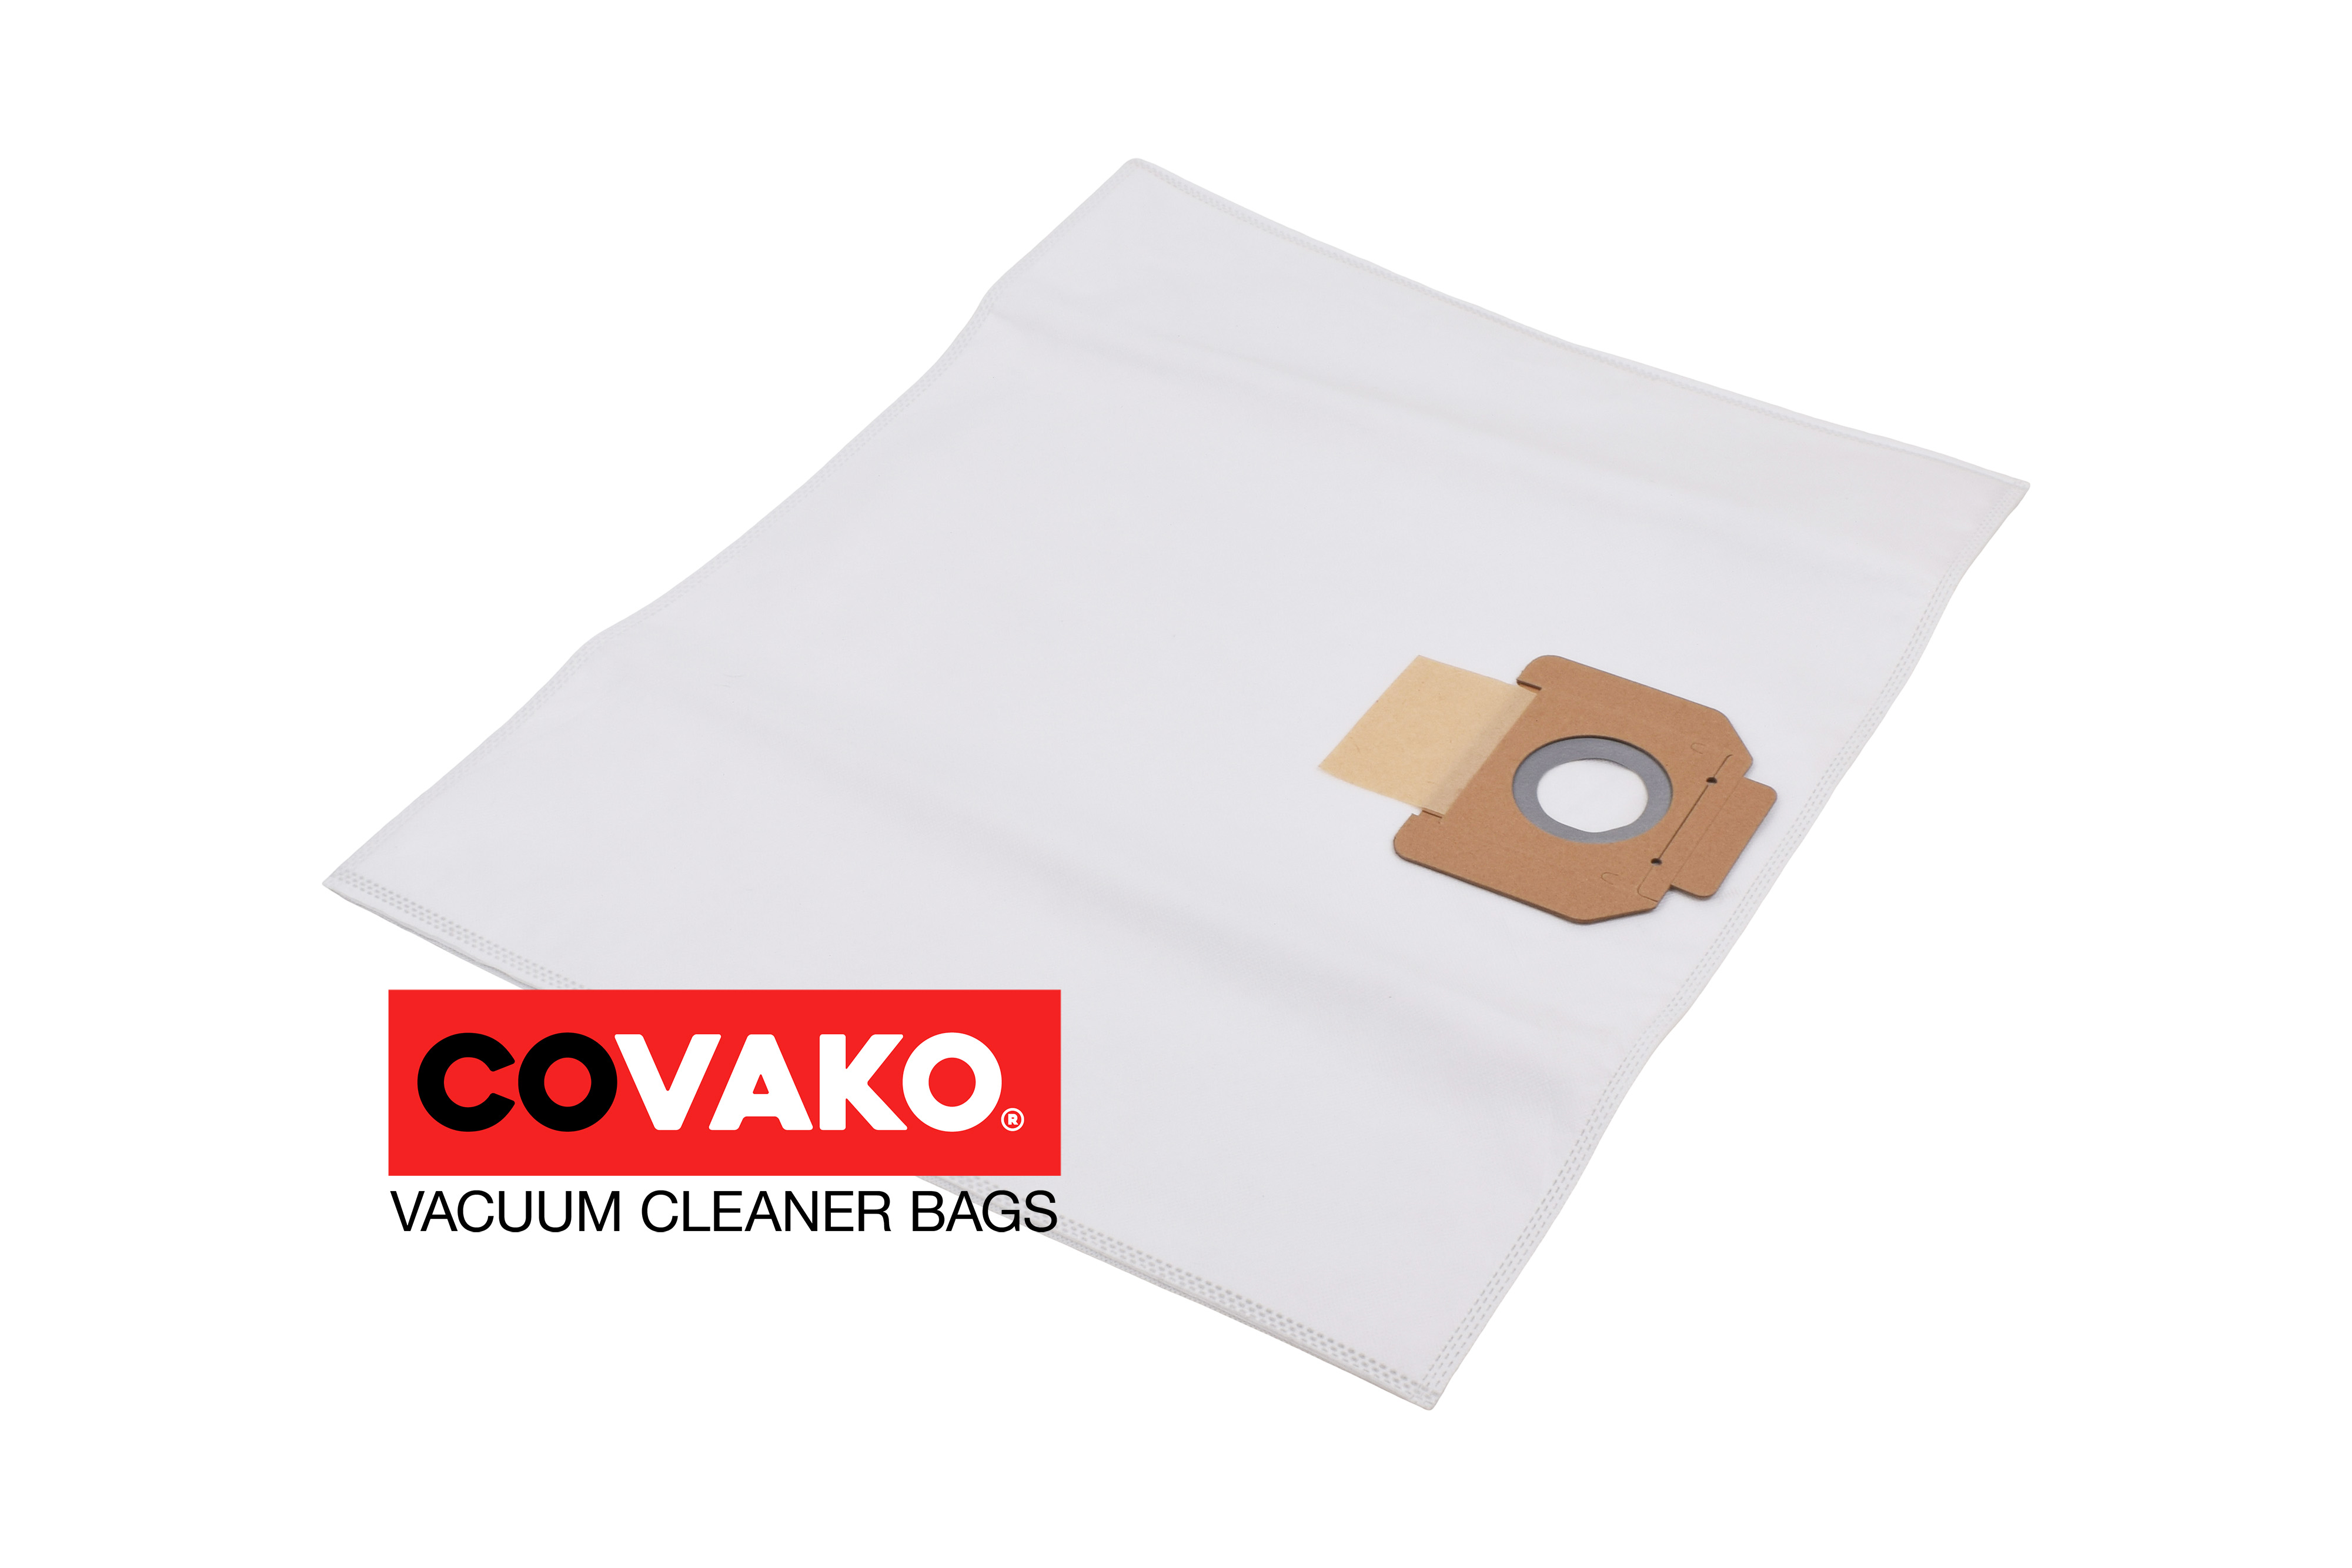 Alto IVB 30 / Synthesis - Alto vacuum cleaner bags